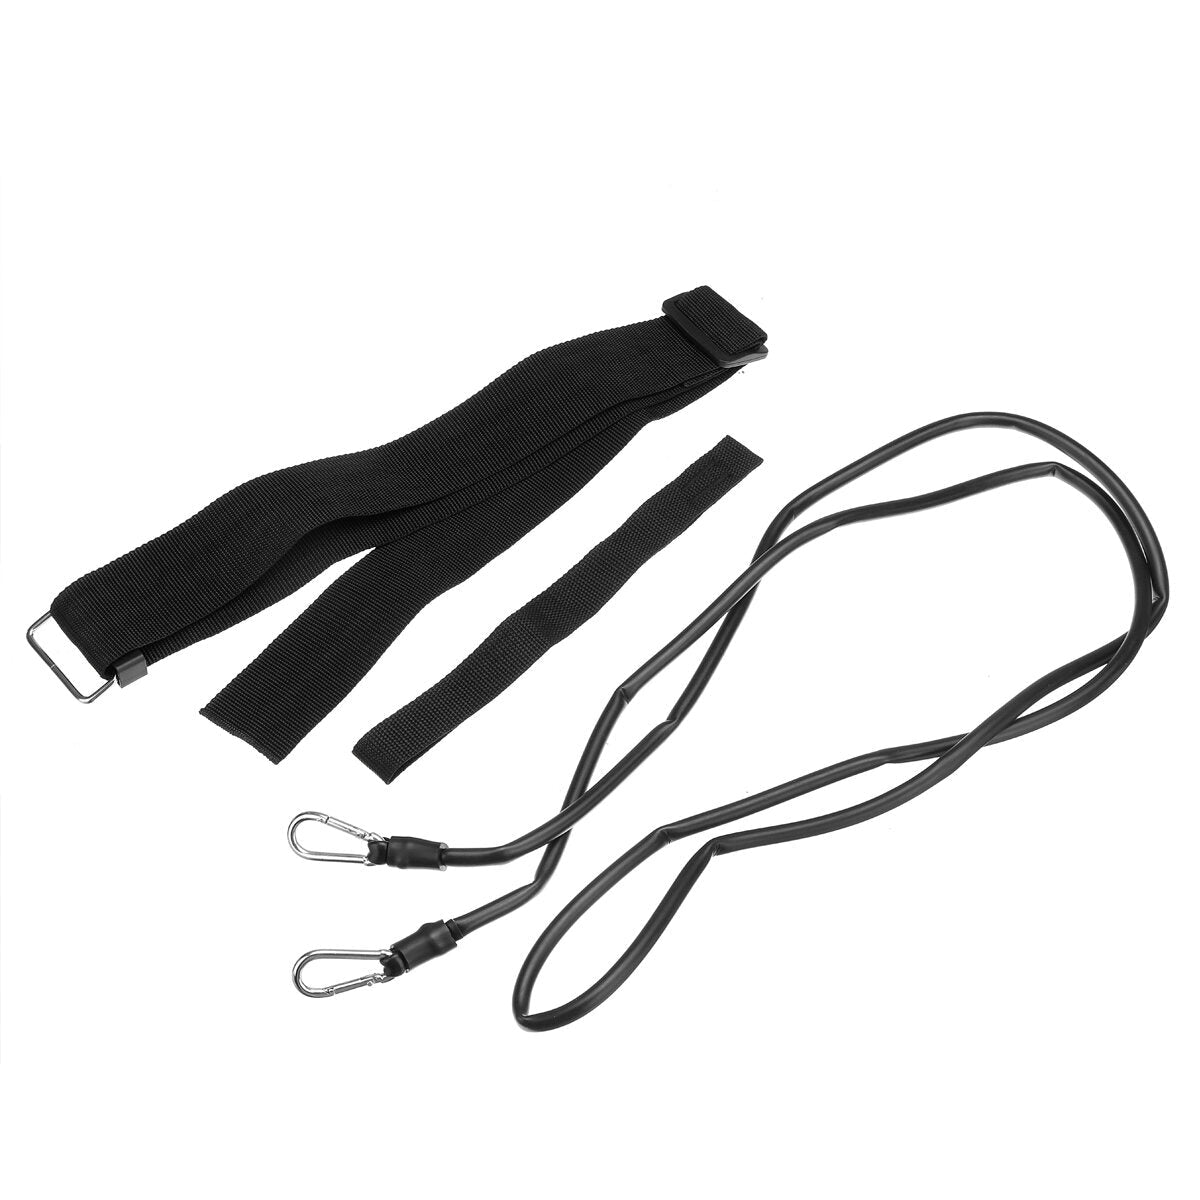 2m Swimming Safety Belts Adult Children Strength Resistance Band Water Training Tools Outdoor Water Sport